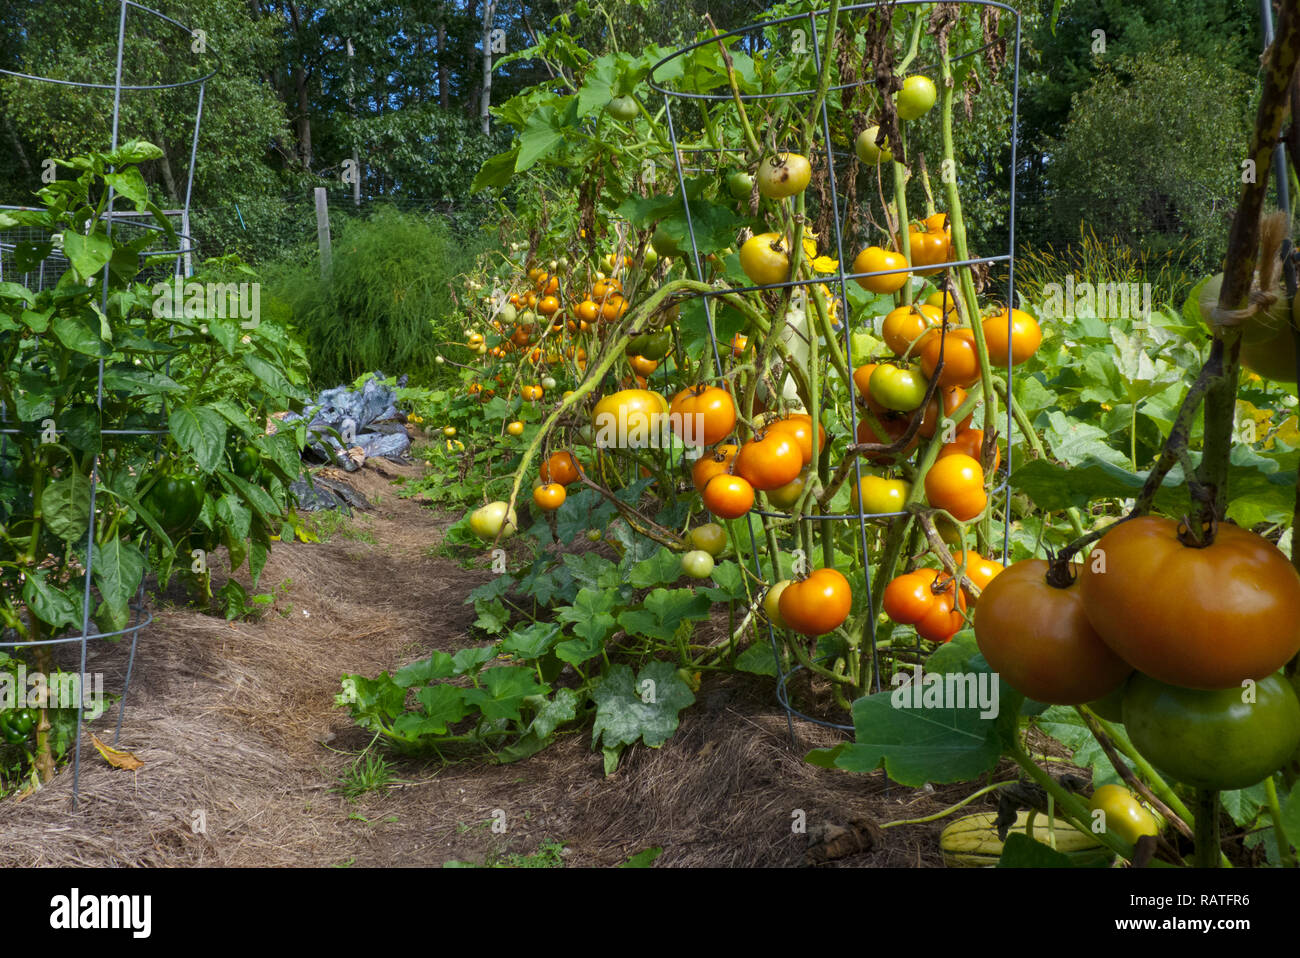 Lush vegetable garden overflowing with tomatoes in cages and row at Community Garden, Maine, USA Stock Photo